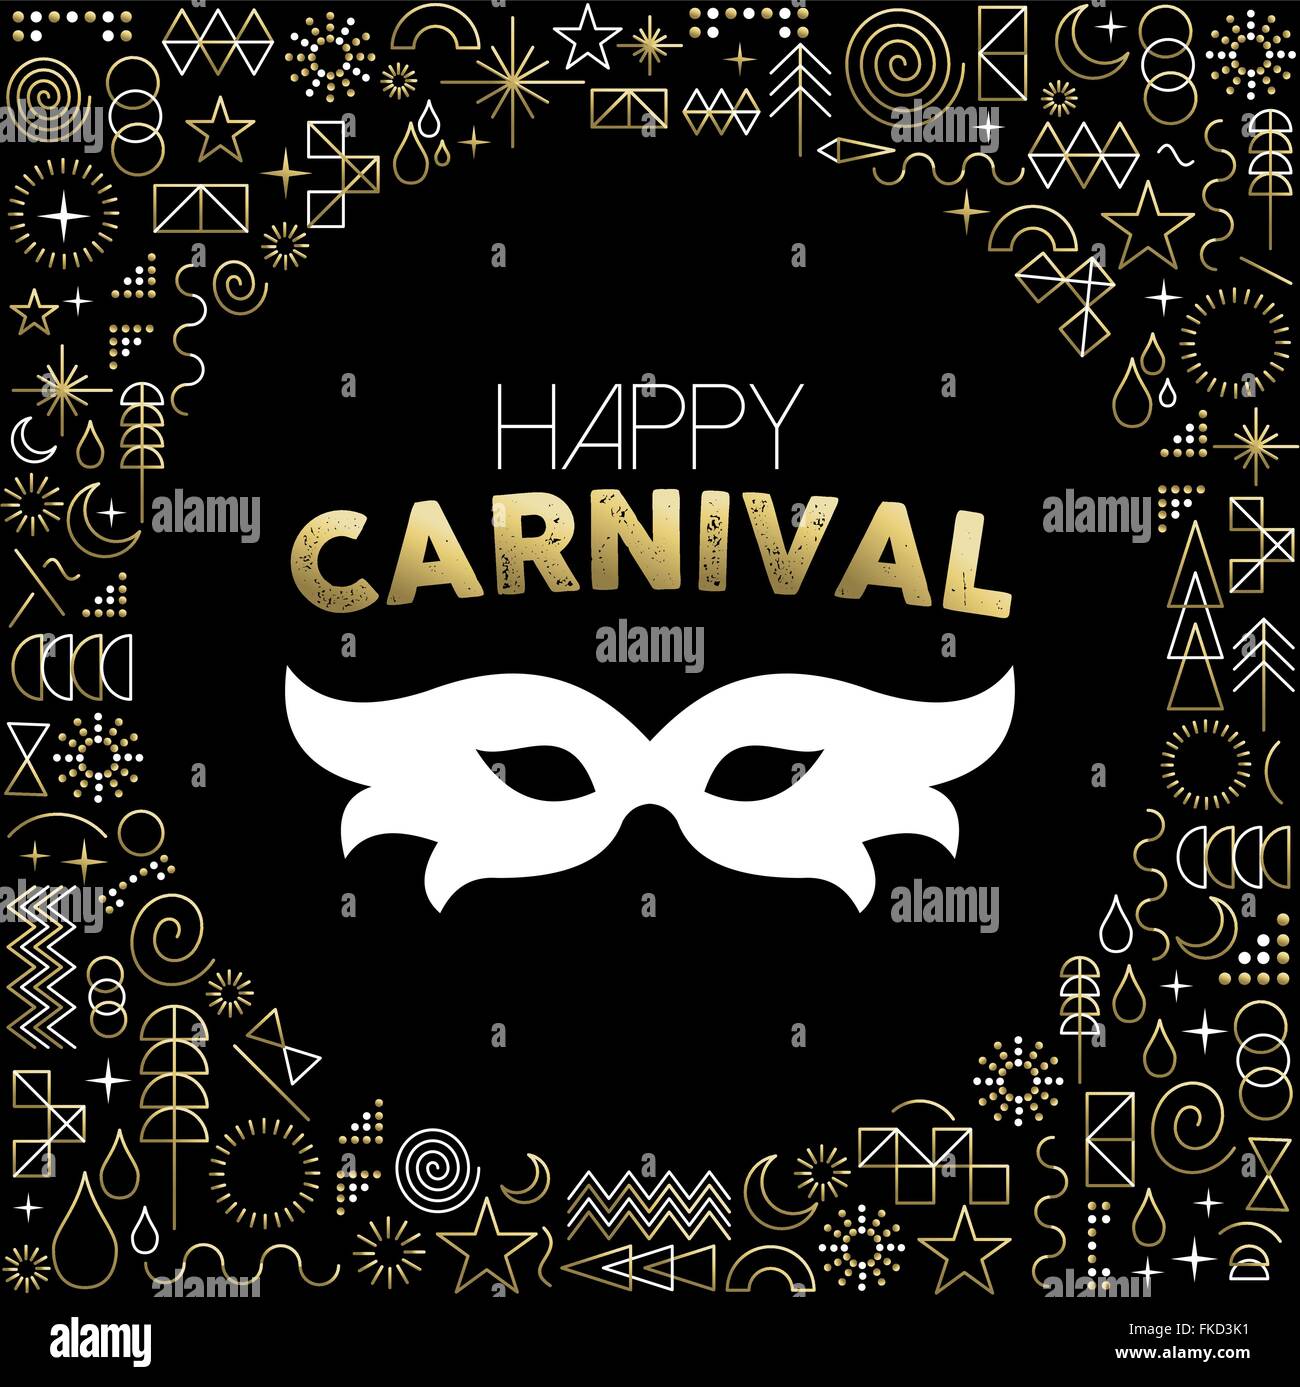 Gold line art background with hipster geometry icons, happy carnival text label and mask silhouette. EPS10 vector. Stock Vector